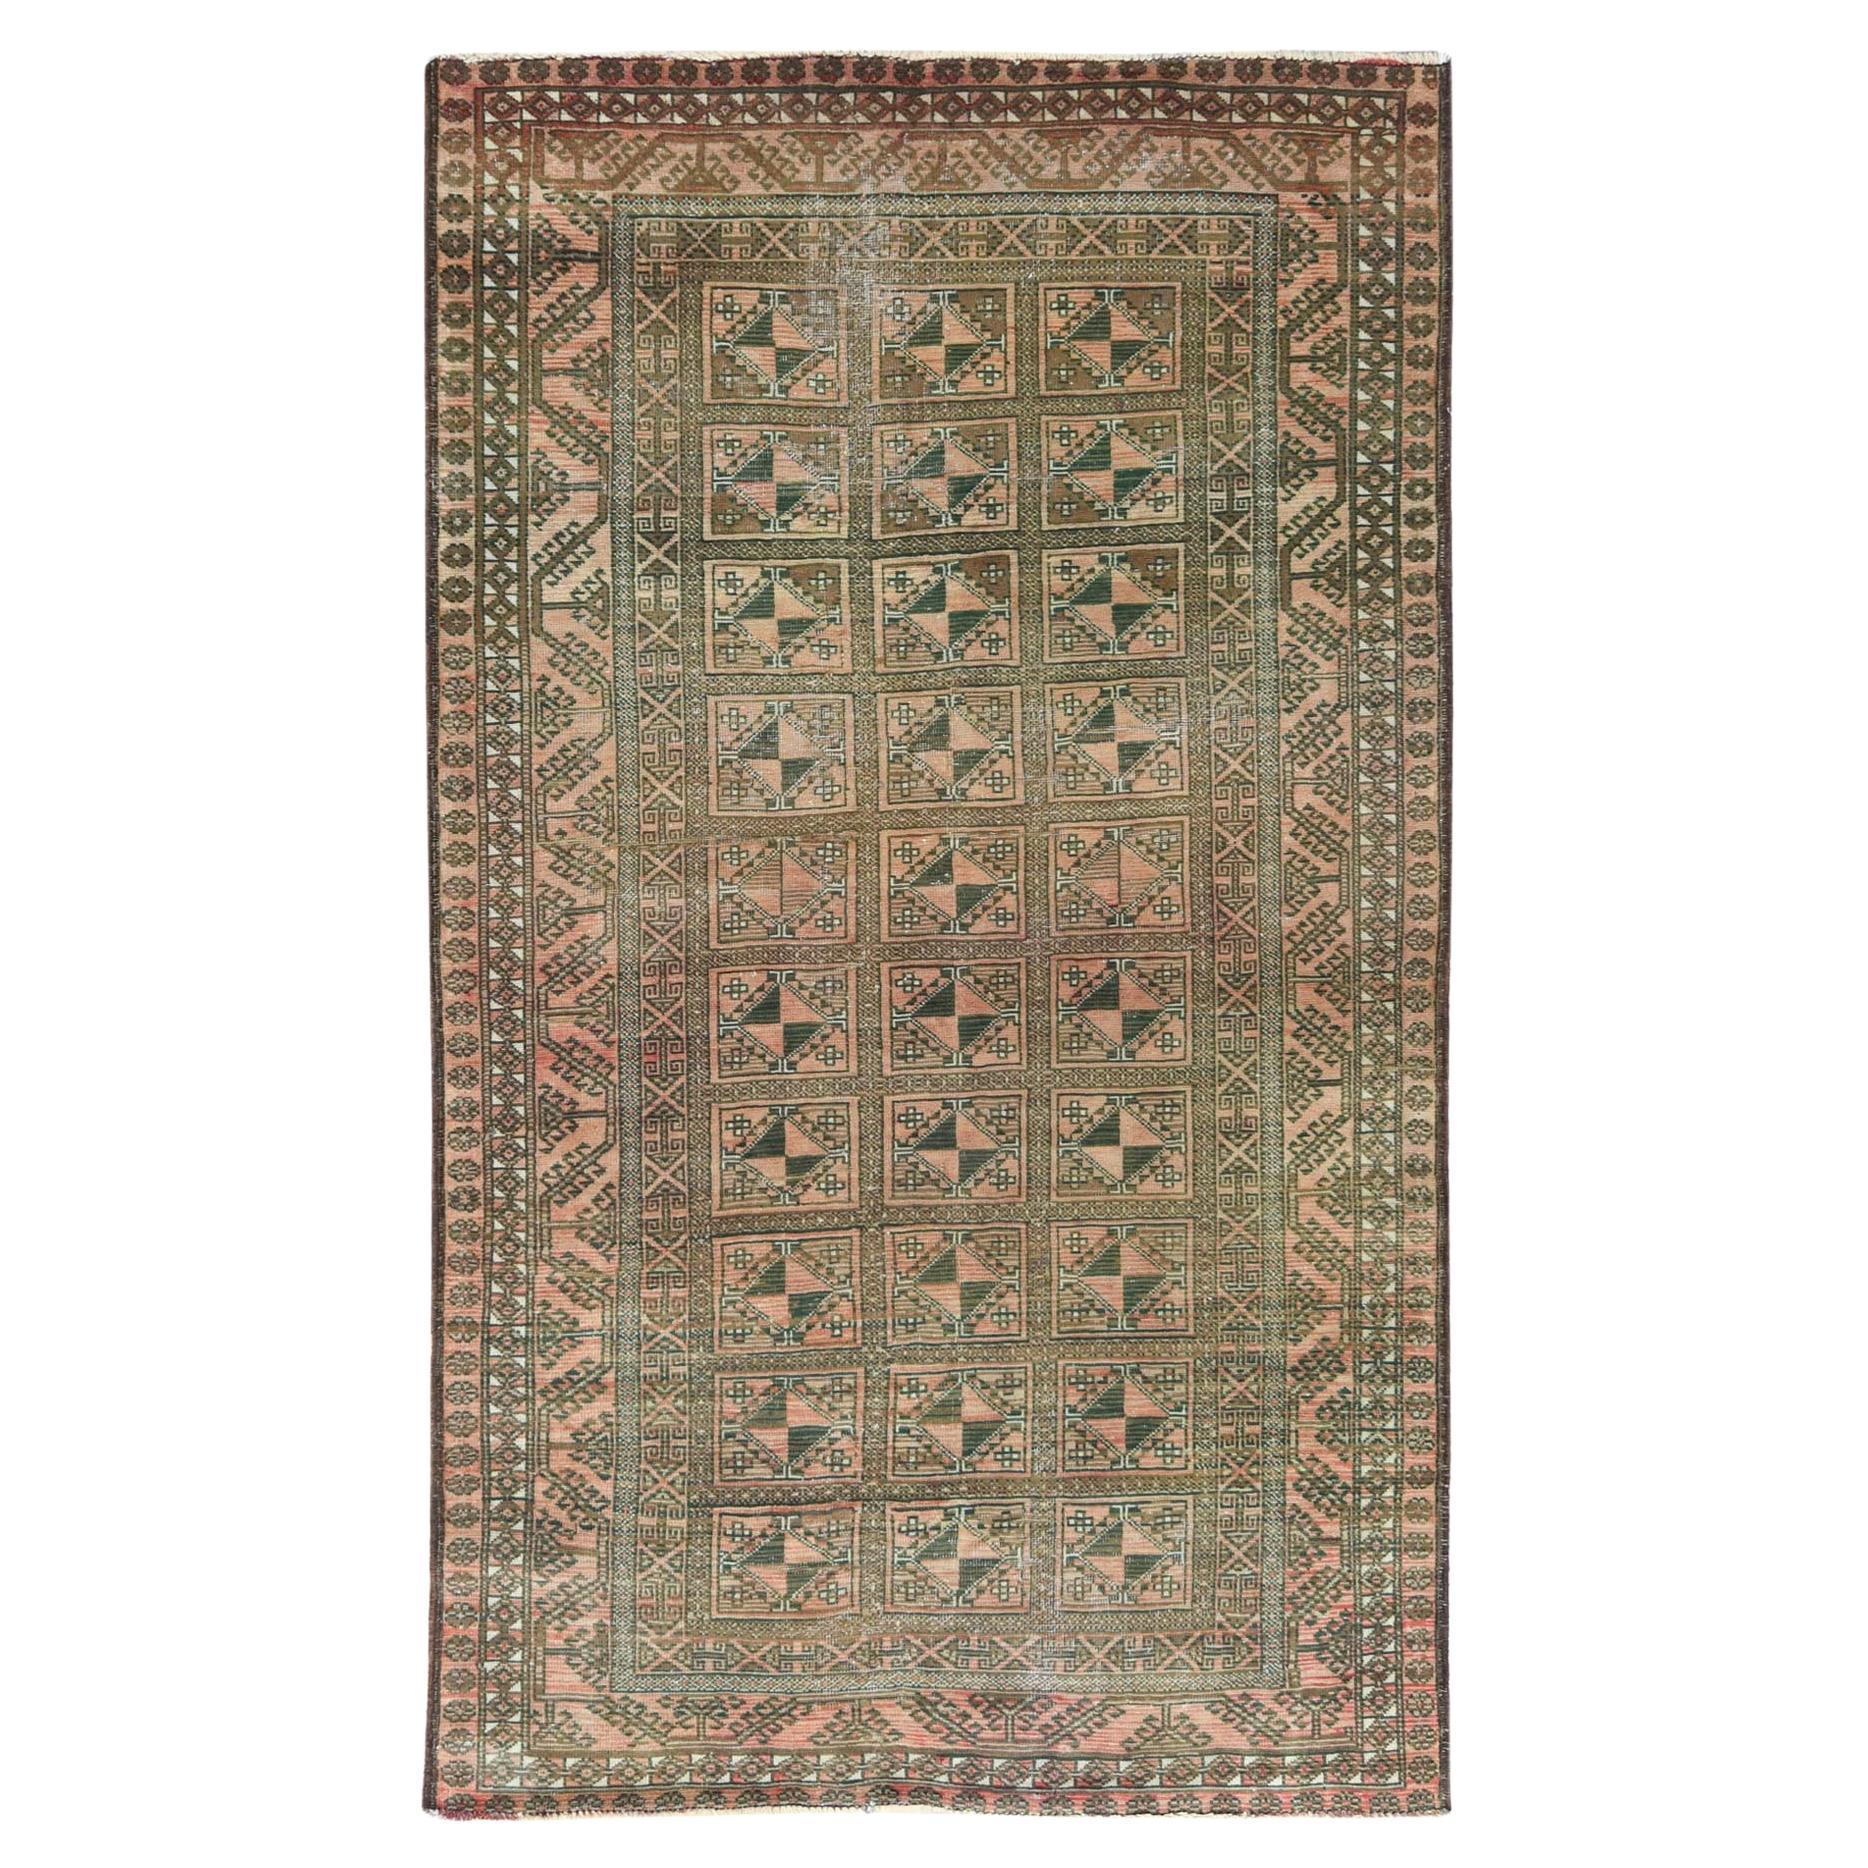 Peach Color Vintage Persian Baluch Distressed Look Worn Wool Hand Knotted Rug For Sale